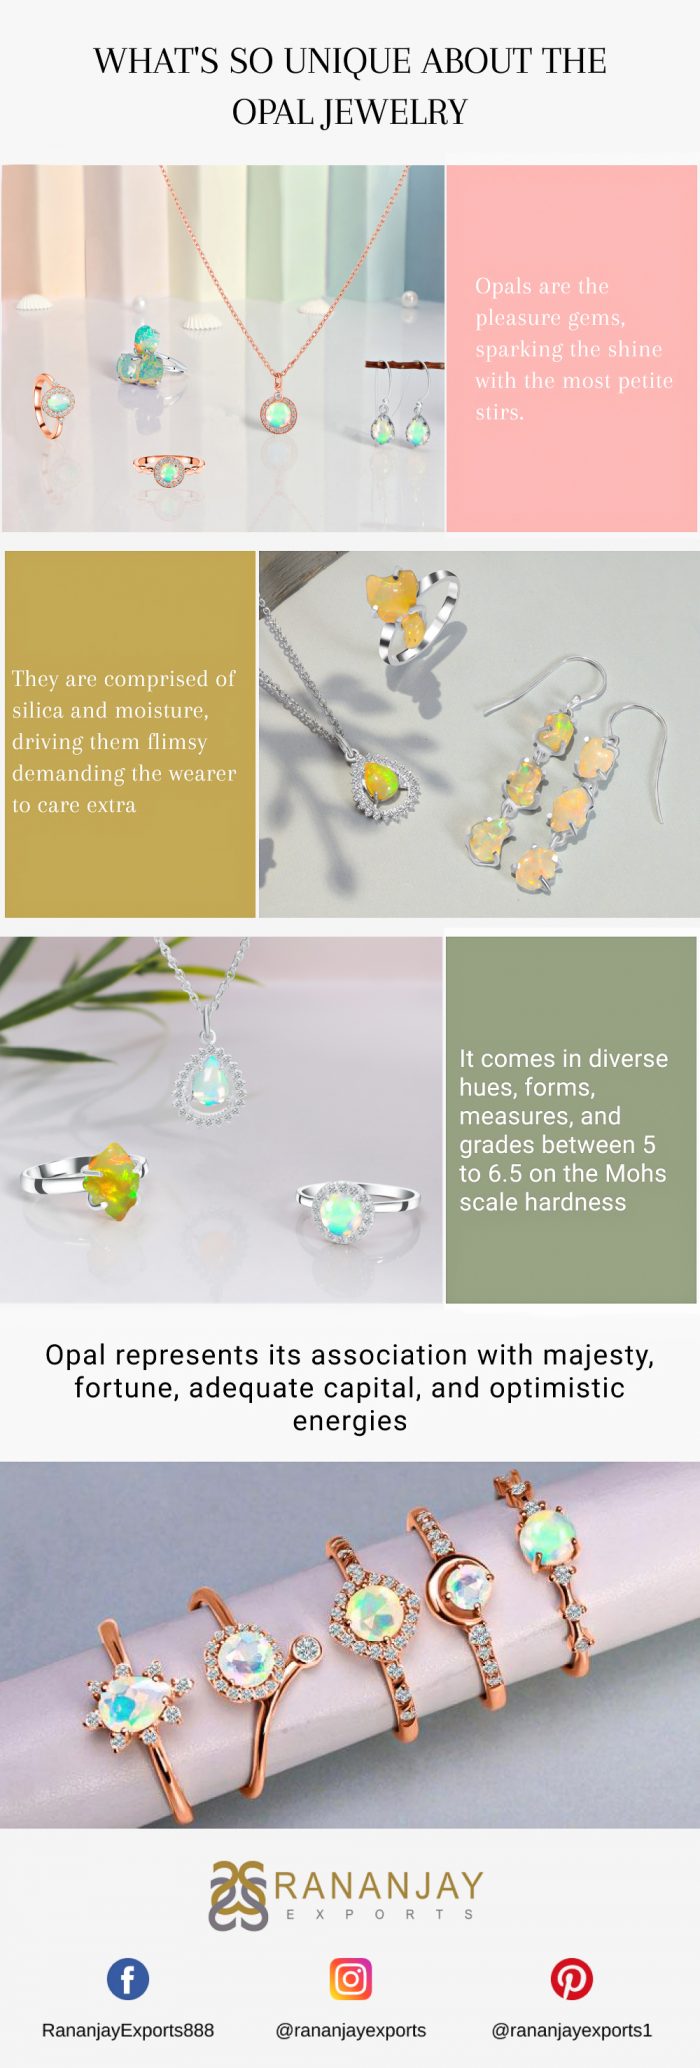 What’s So Unique About The Opal Jewelry